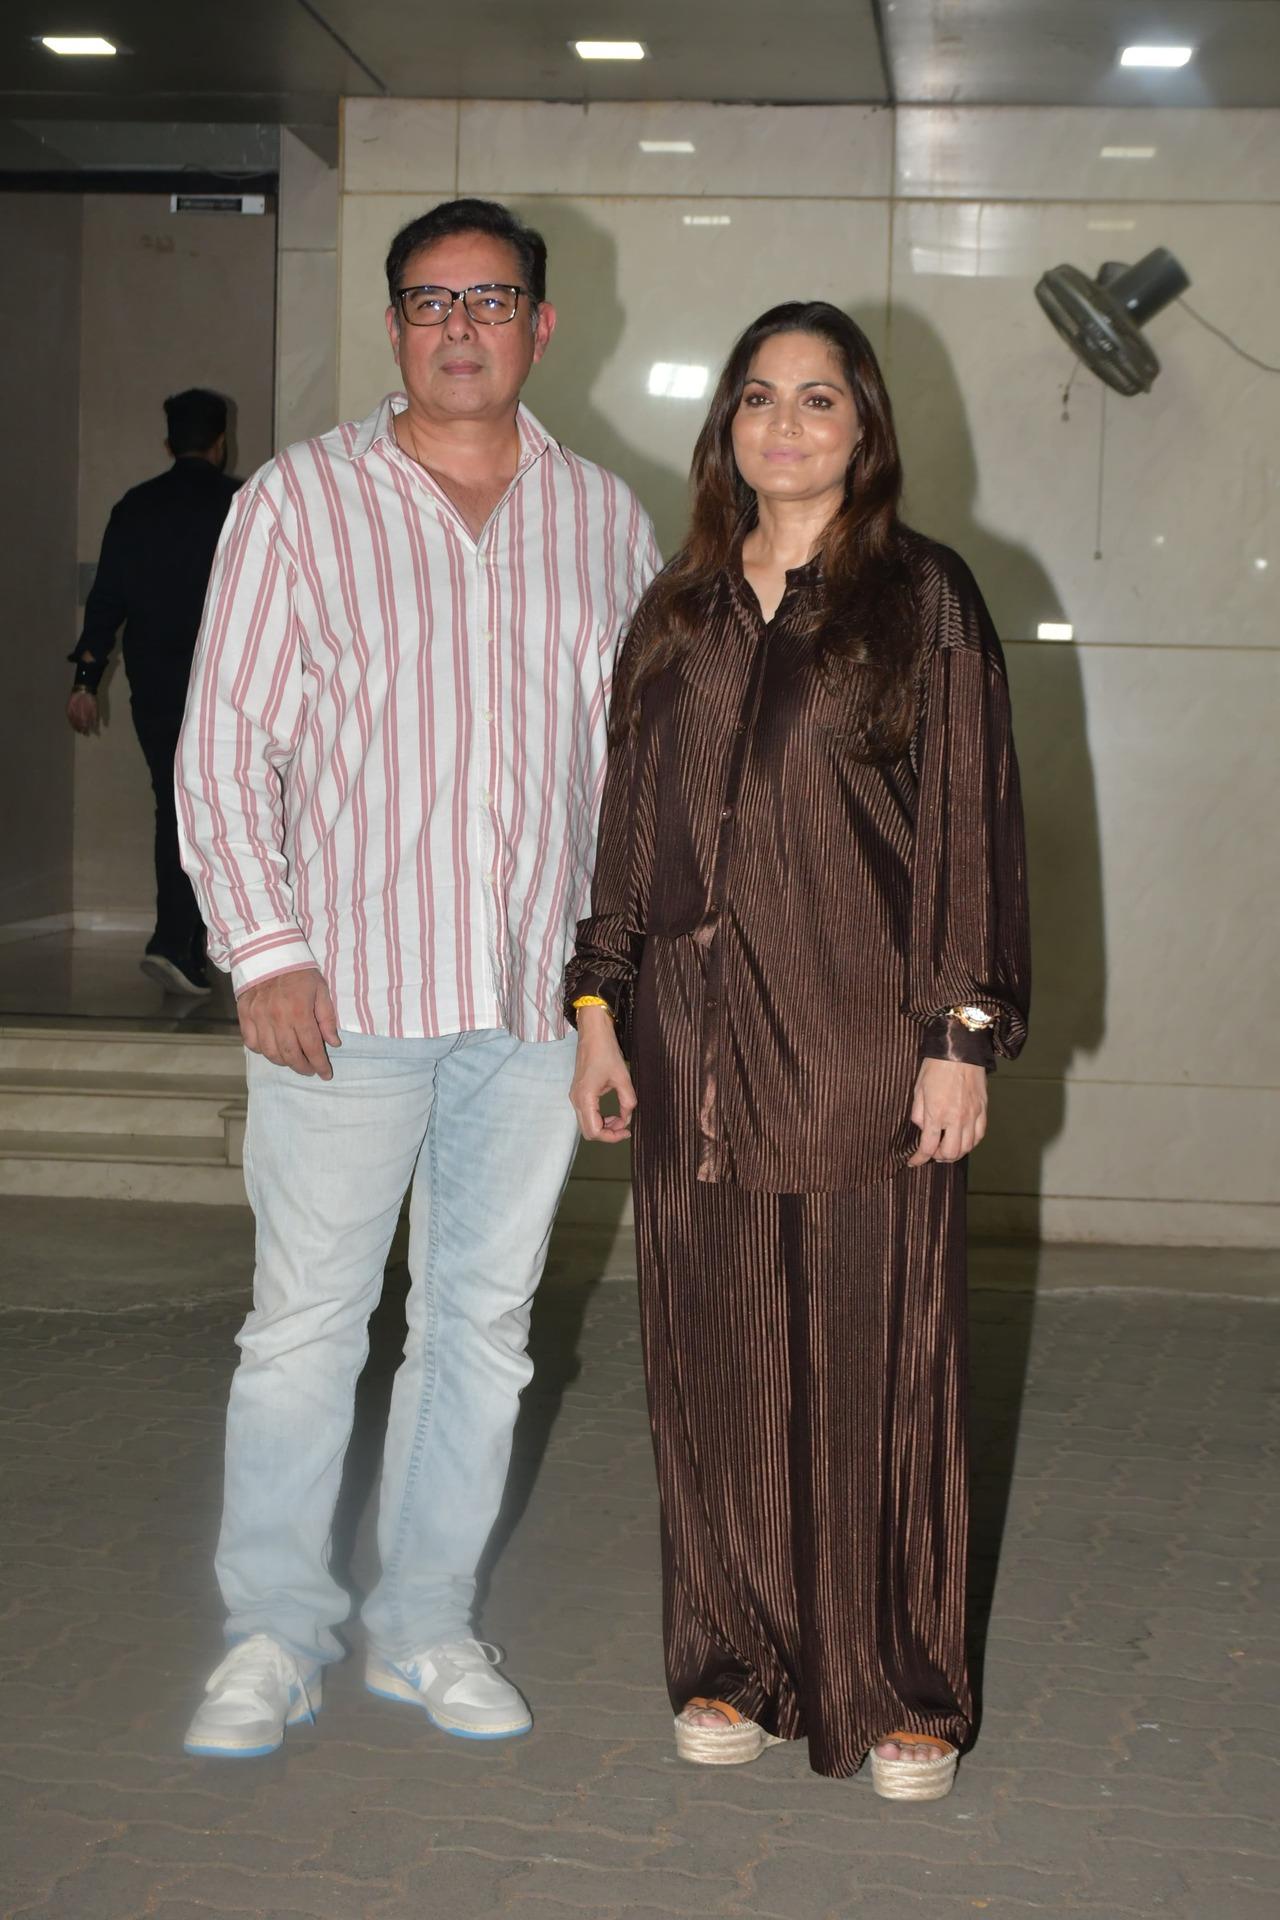 Salman Khan and Arbaaz Khan's sister Alvira Agnihotri along with her husband Atul Agnihotri also marked their presence at the birthday party